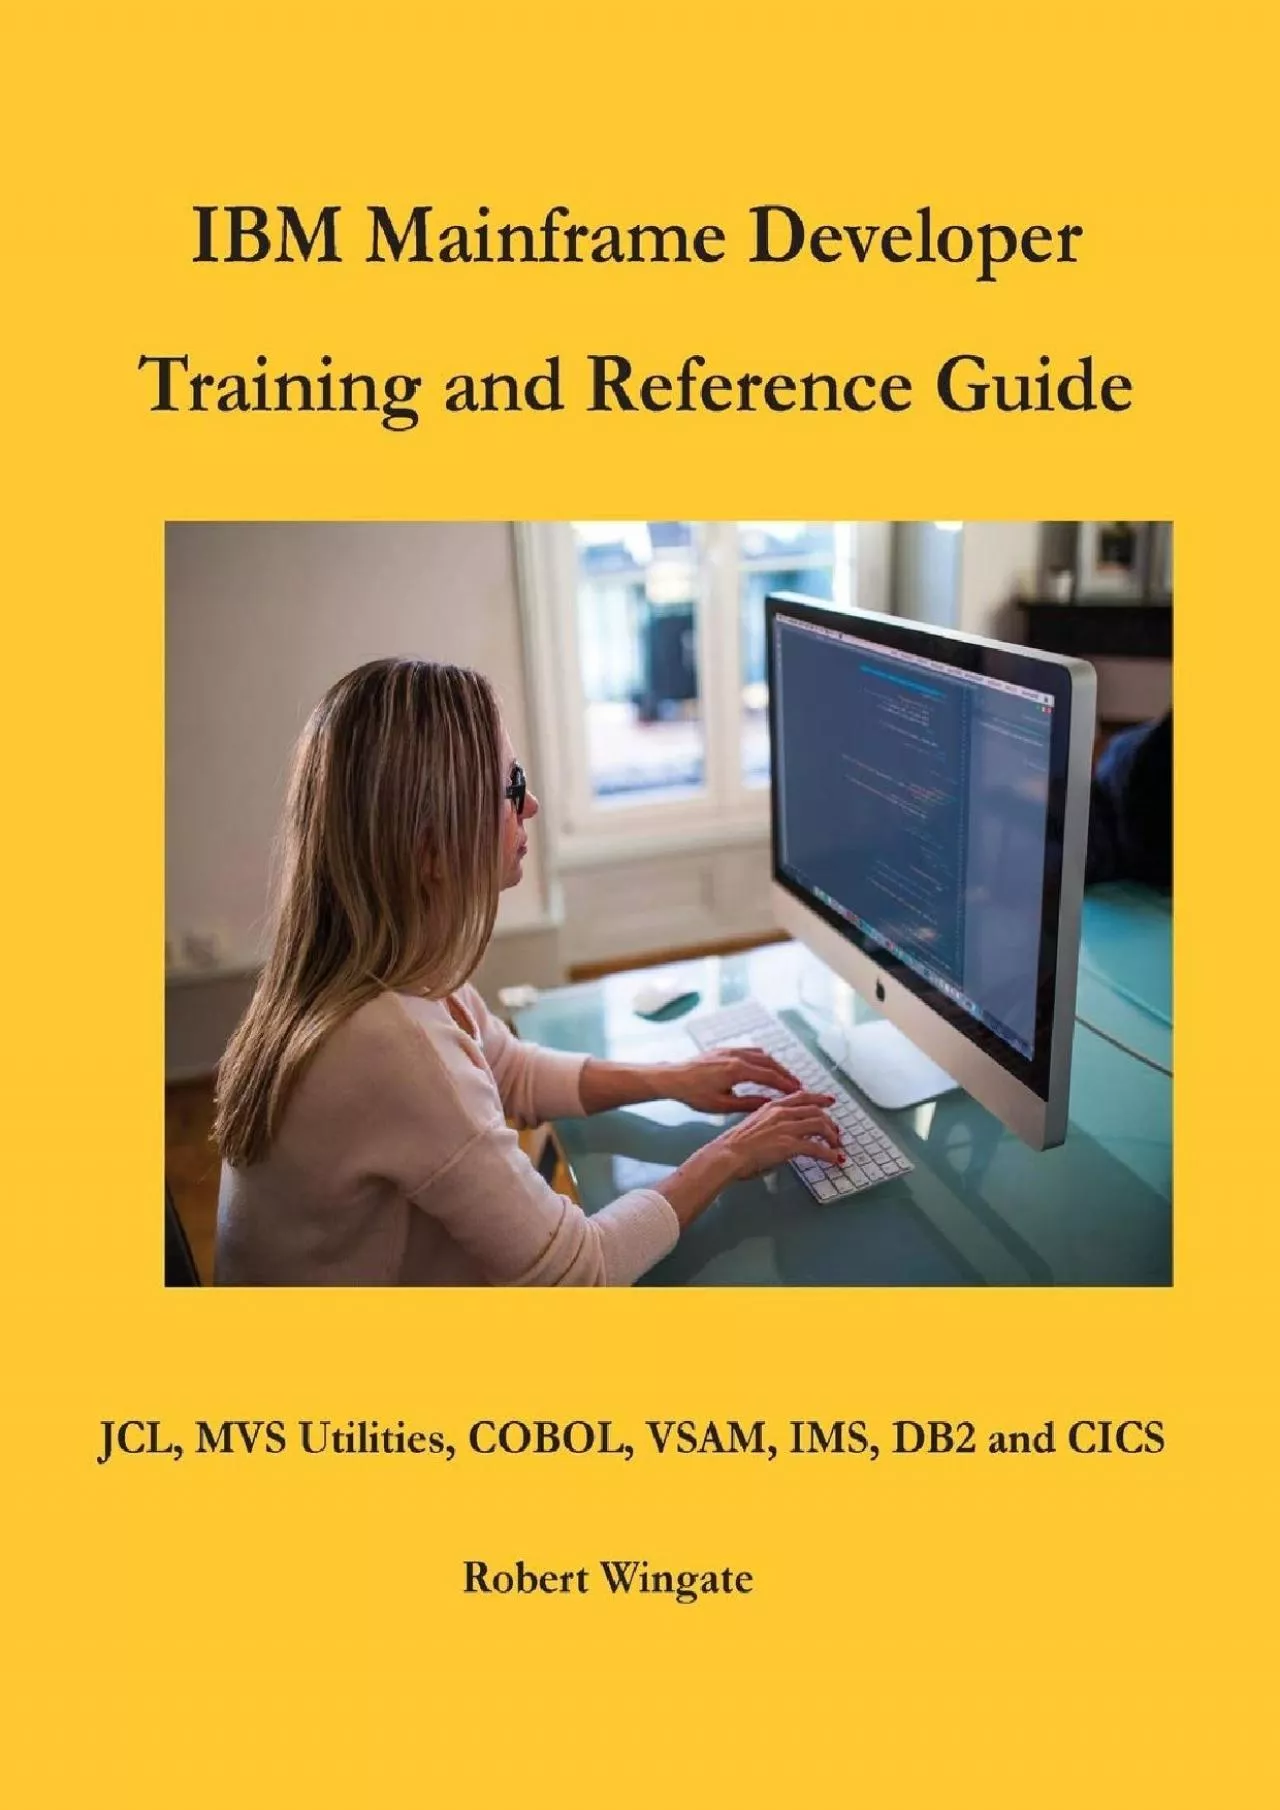 [FREE]-IBM Mainframe Developer Training and Reference Guide